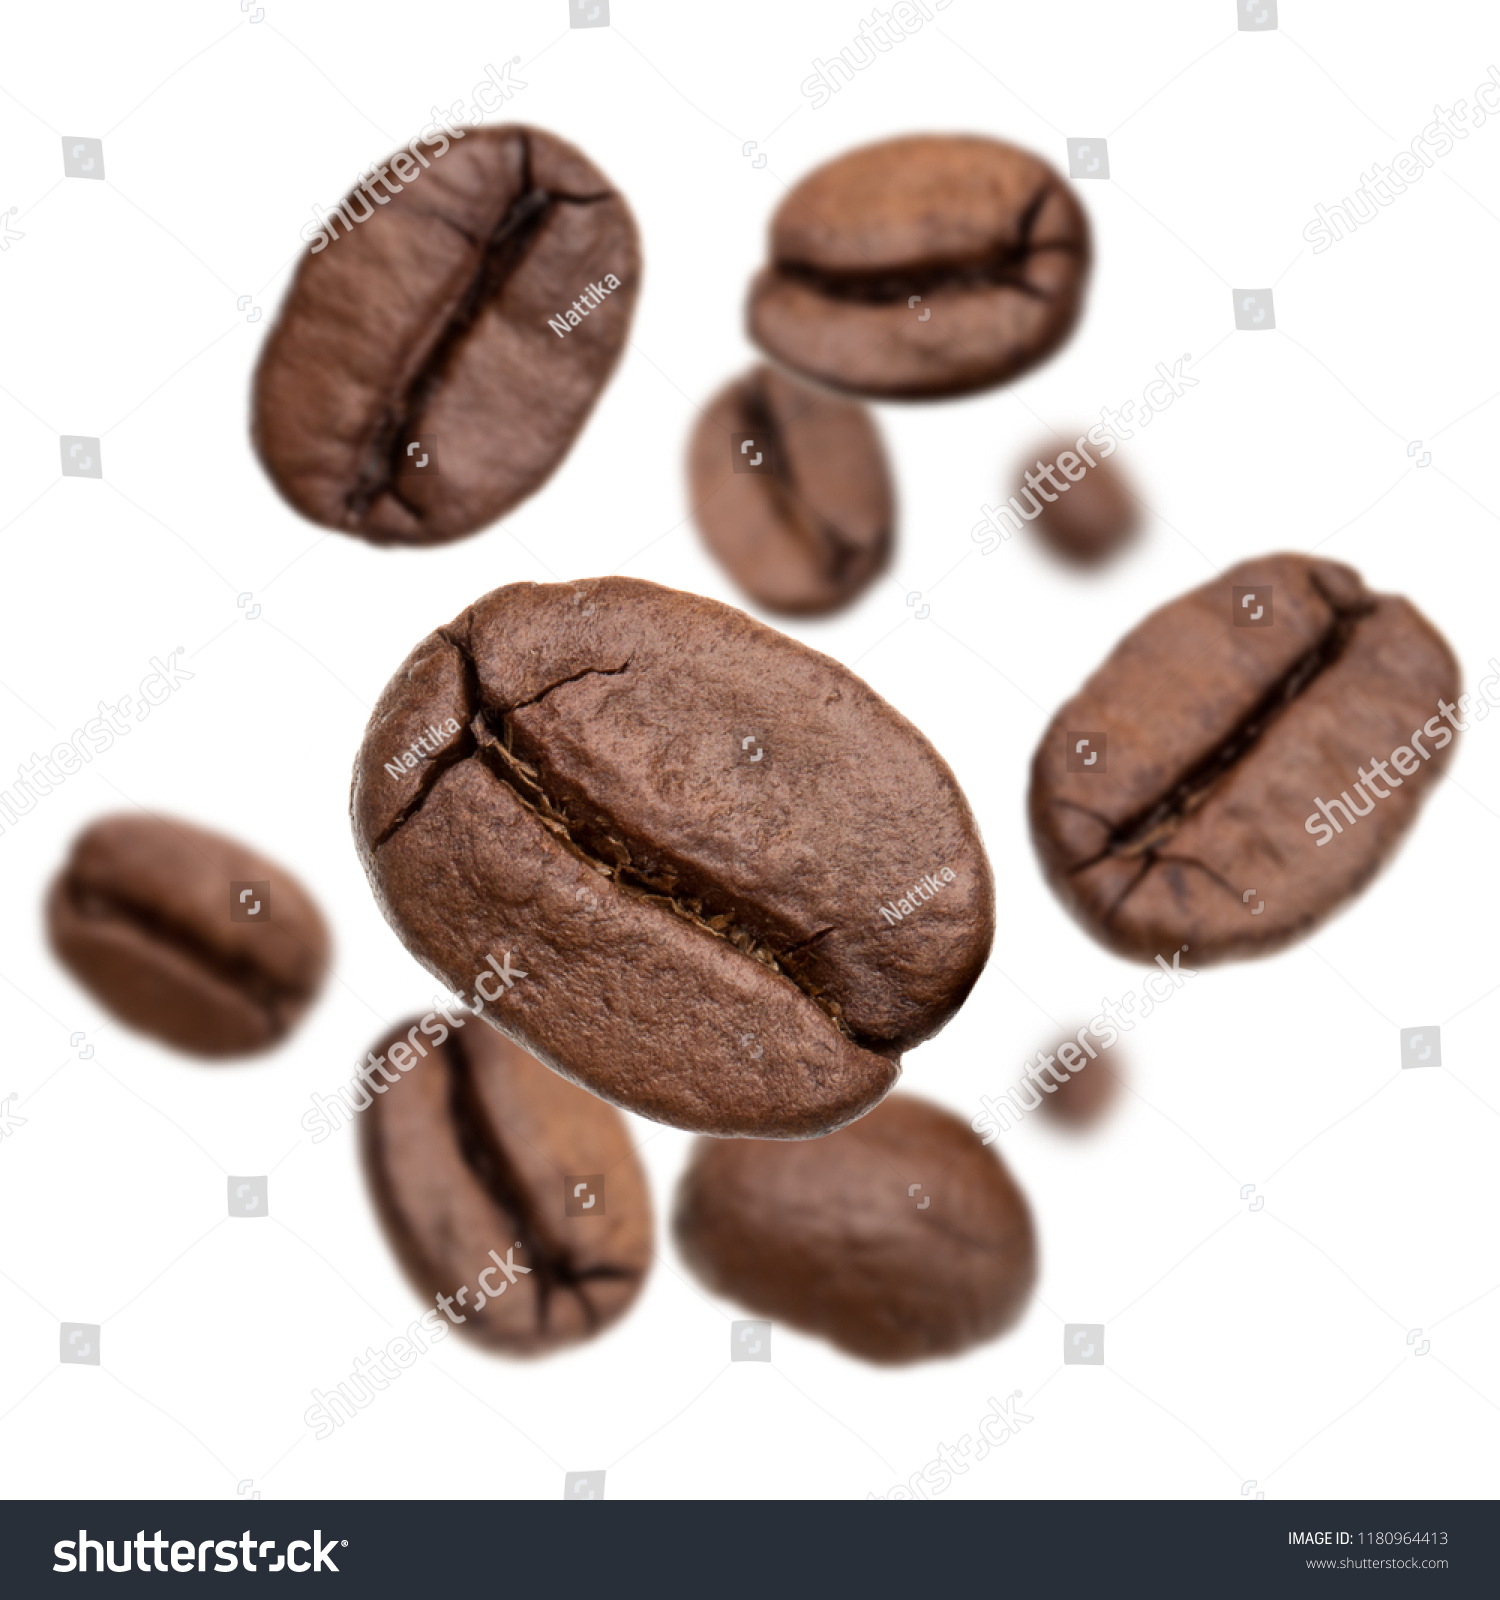 Flying roasted coffee beans isolated in white background cutout. Food background. #1180964413